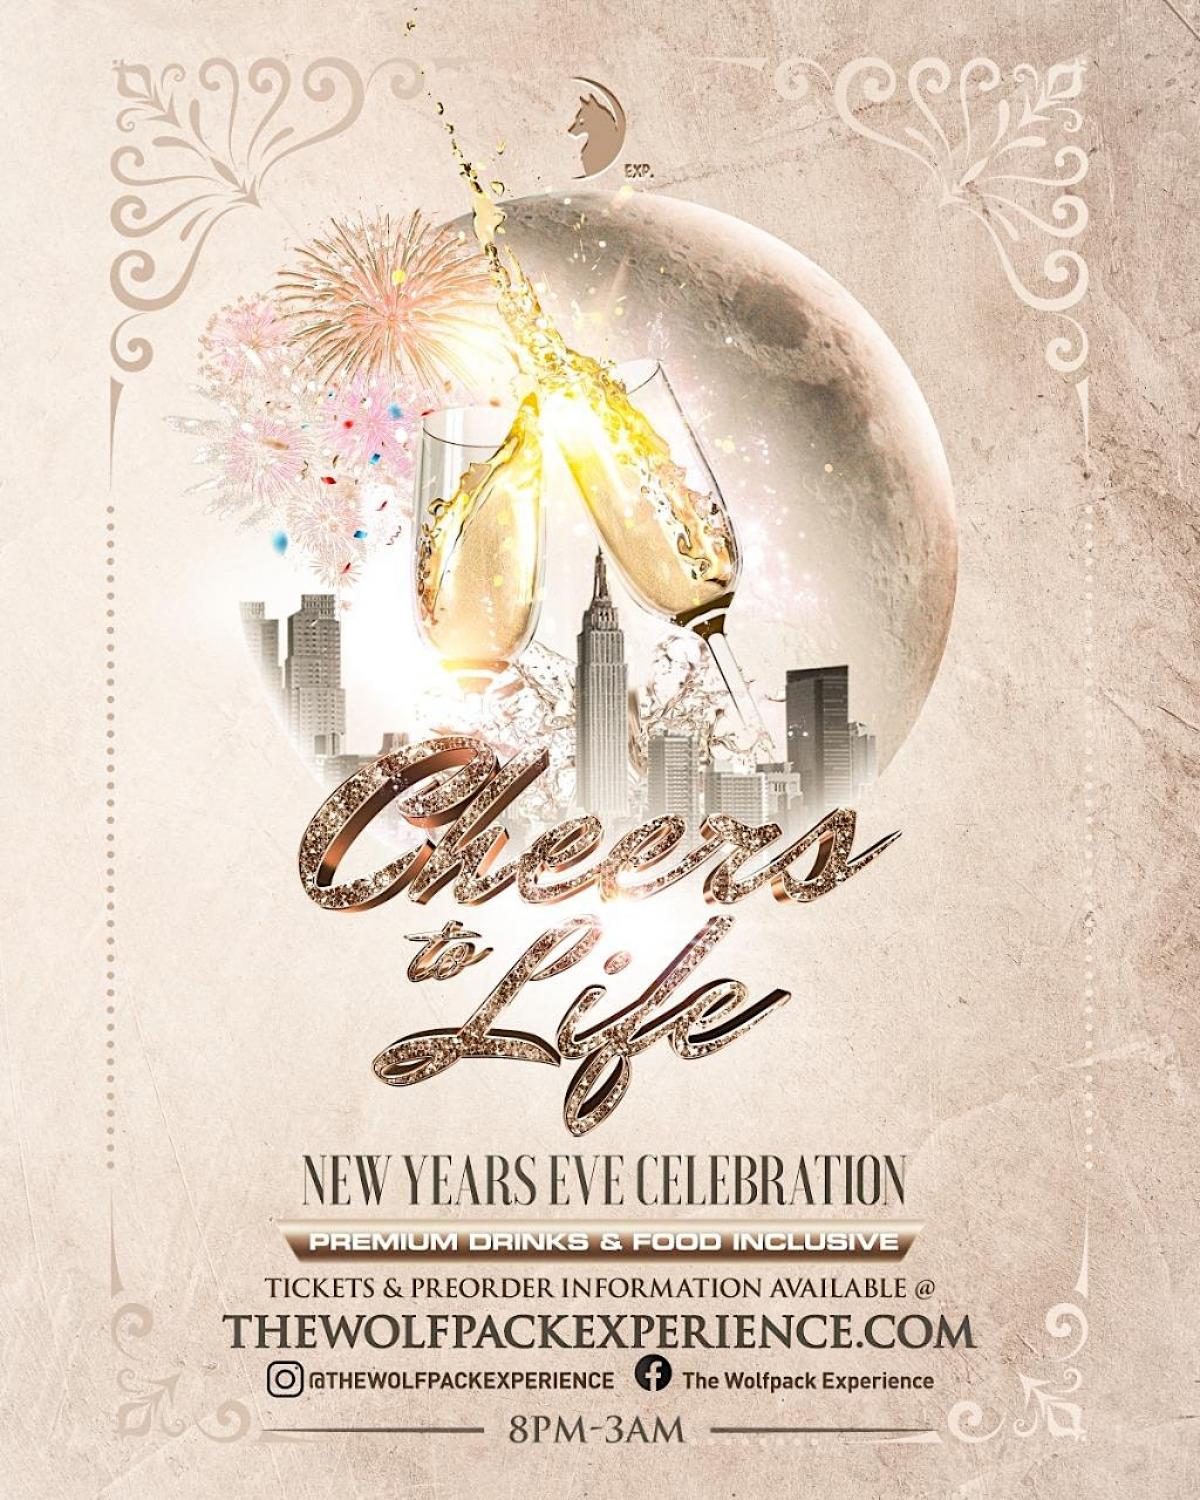 Cheers To Life: New Year's Eve Celebration  flyer or graphic.